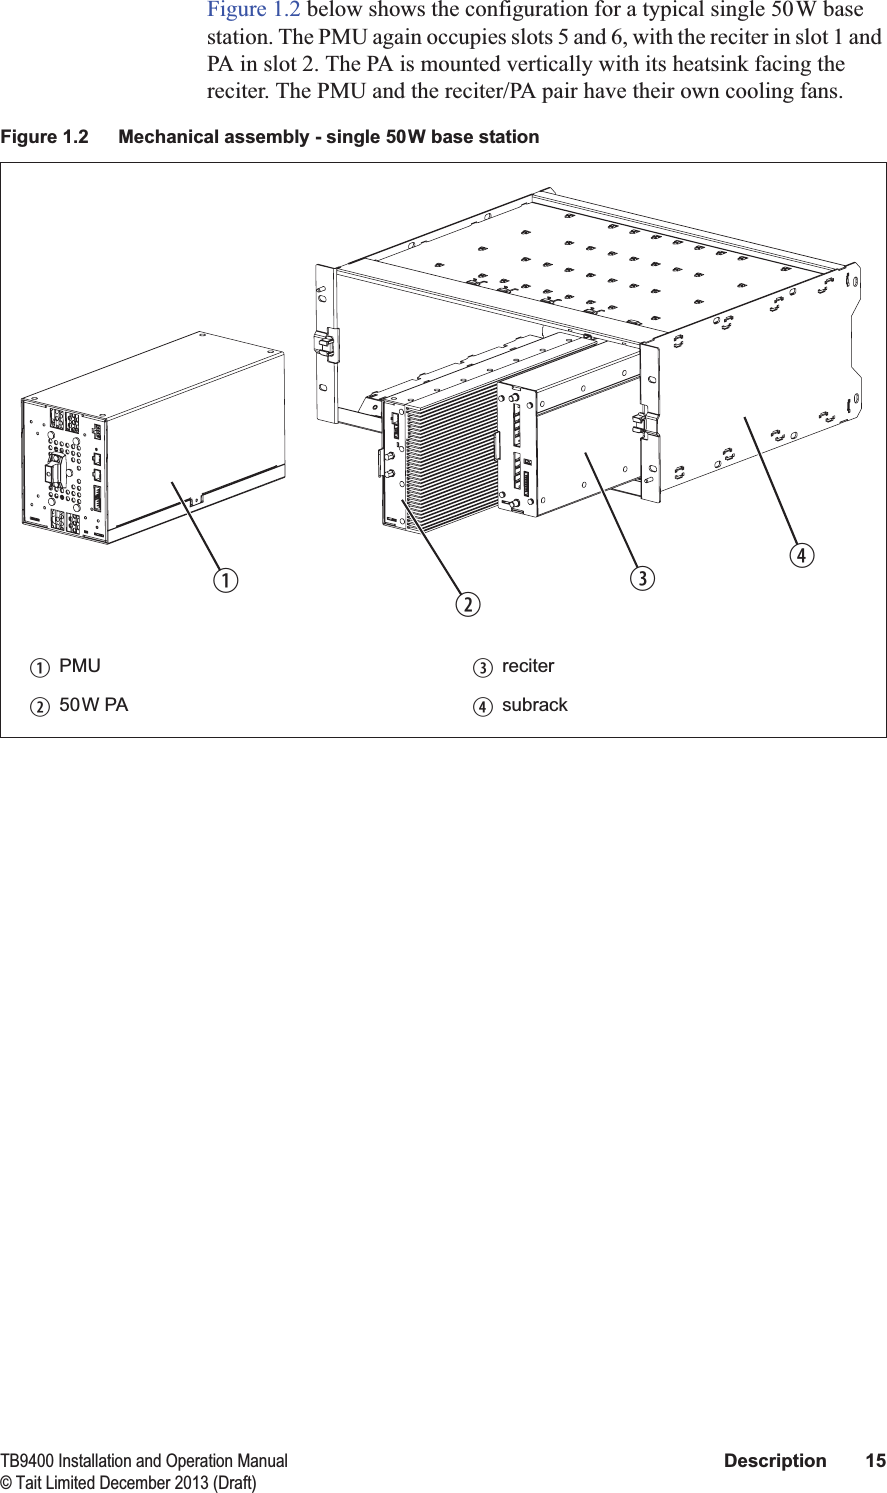  TB9400 Installation and Operation Manual Description 15© Tait Limited December 2013 (Draft)Figure 1.2 below shows the configuration for a typical single 50W base station. The PMU again occupies slots 5 and 6, with the reciter in slot 1 and PA in slot 2. The PA is mounted vertically with its heatsink facing the reciter. The PMU and the reciter/PA pair have their own cooling fans.Figure 1.2 Mechanical assembly - single 50W base stationbPMU dreciterc50W PA esubrackbcde